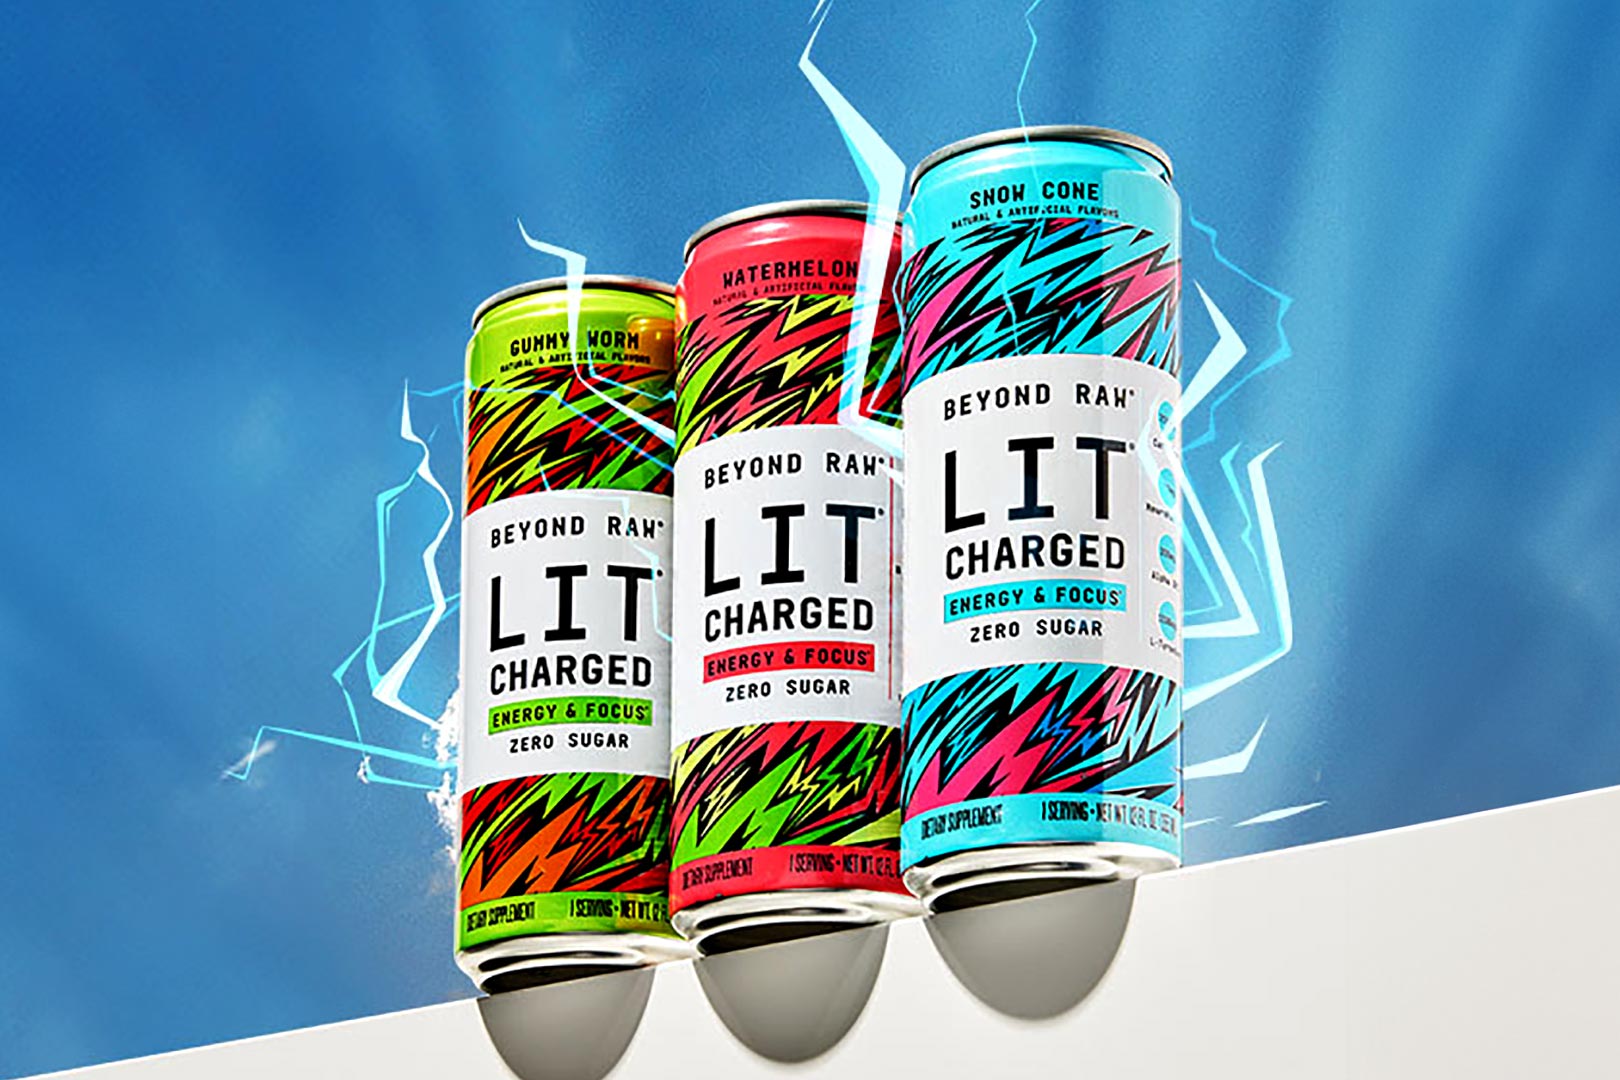 Beyond Raw One Dollar Cans Of Lit Charged